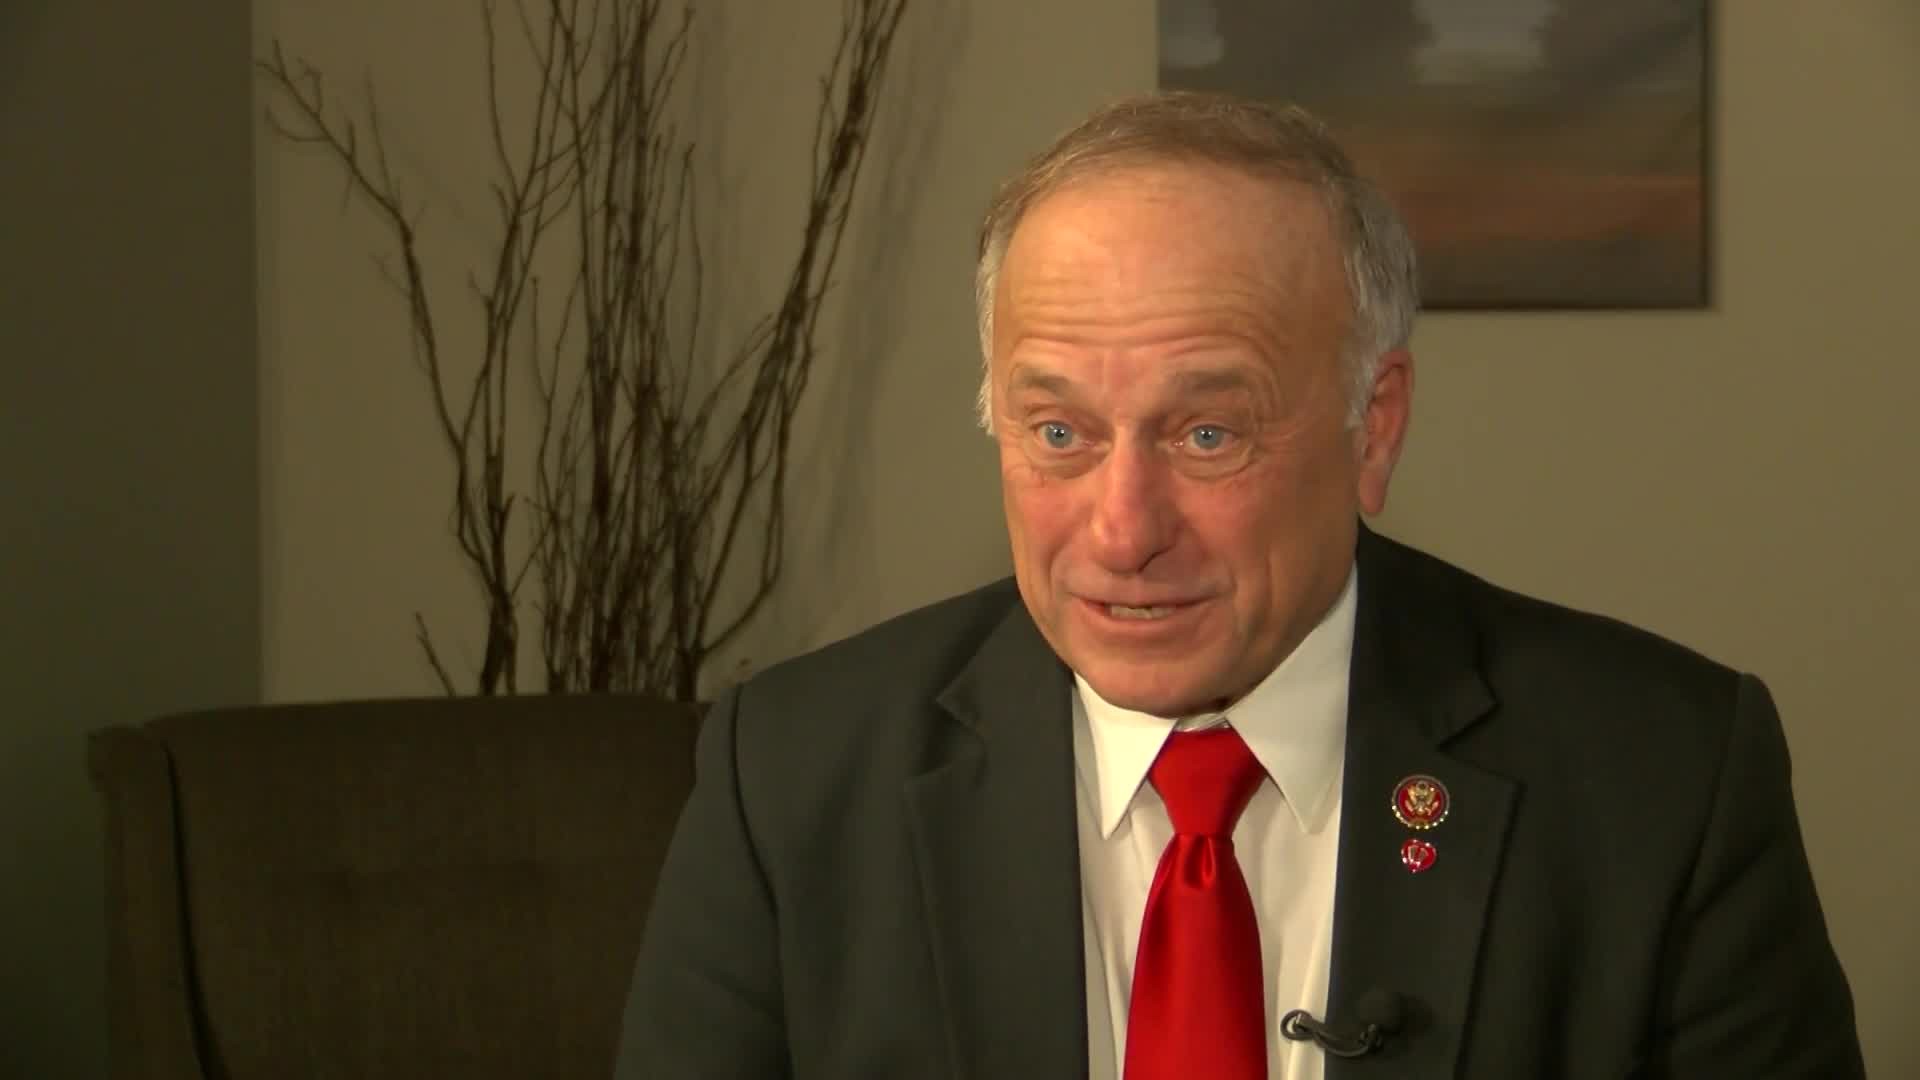 Rep. Steve King talks about his Republican primary challengers